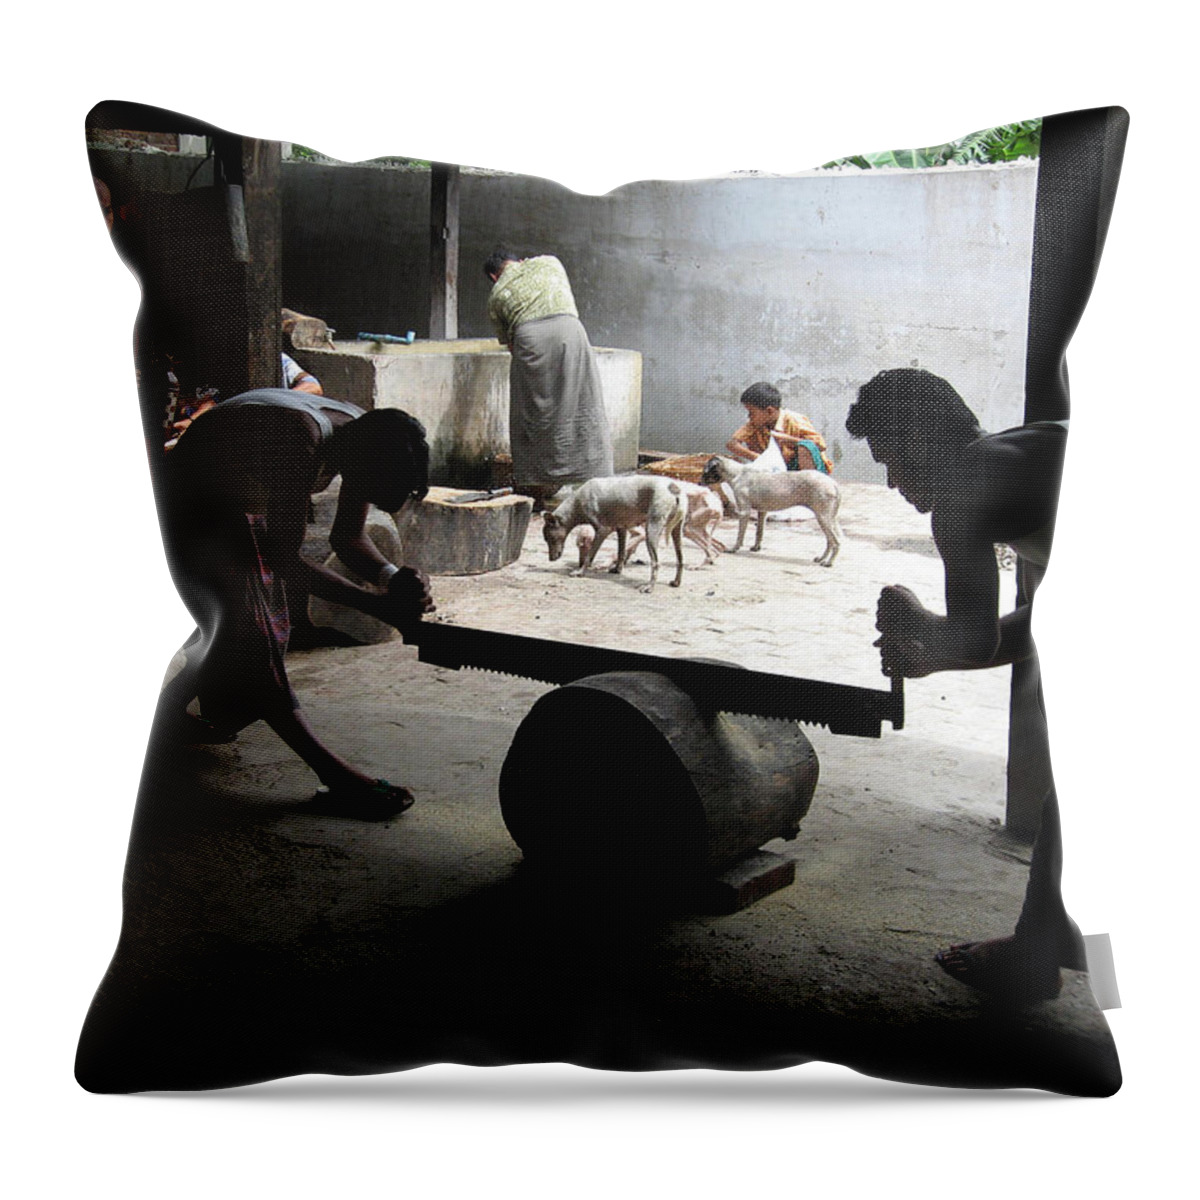 Maha Gandhayon Kyaung Throw Pillow featuring the photograph In the Buddha's kitchen by RicardMN Photography